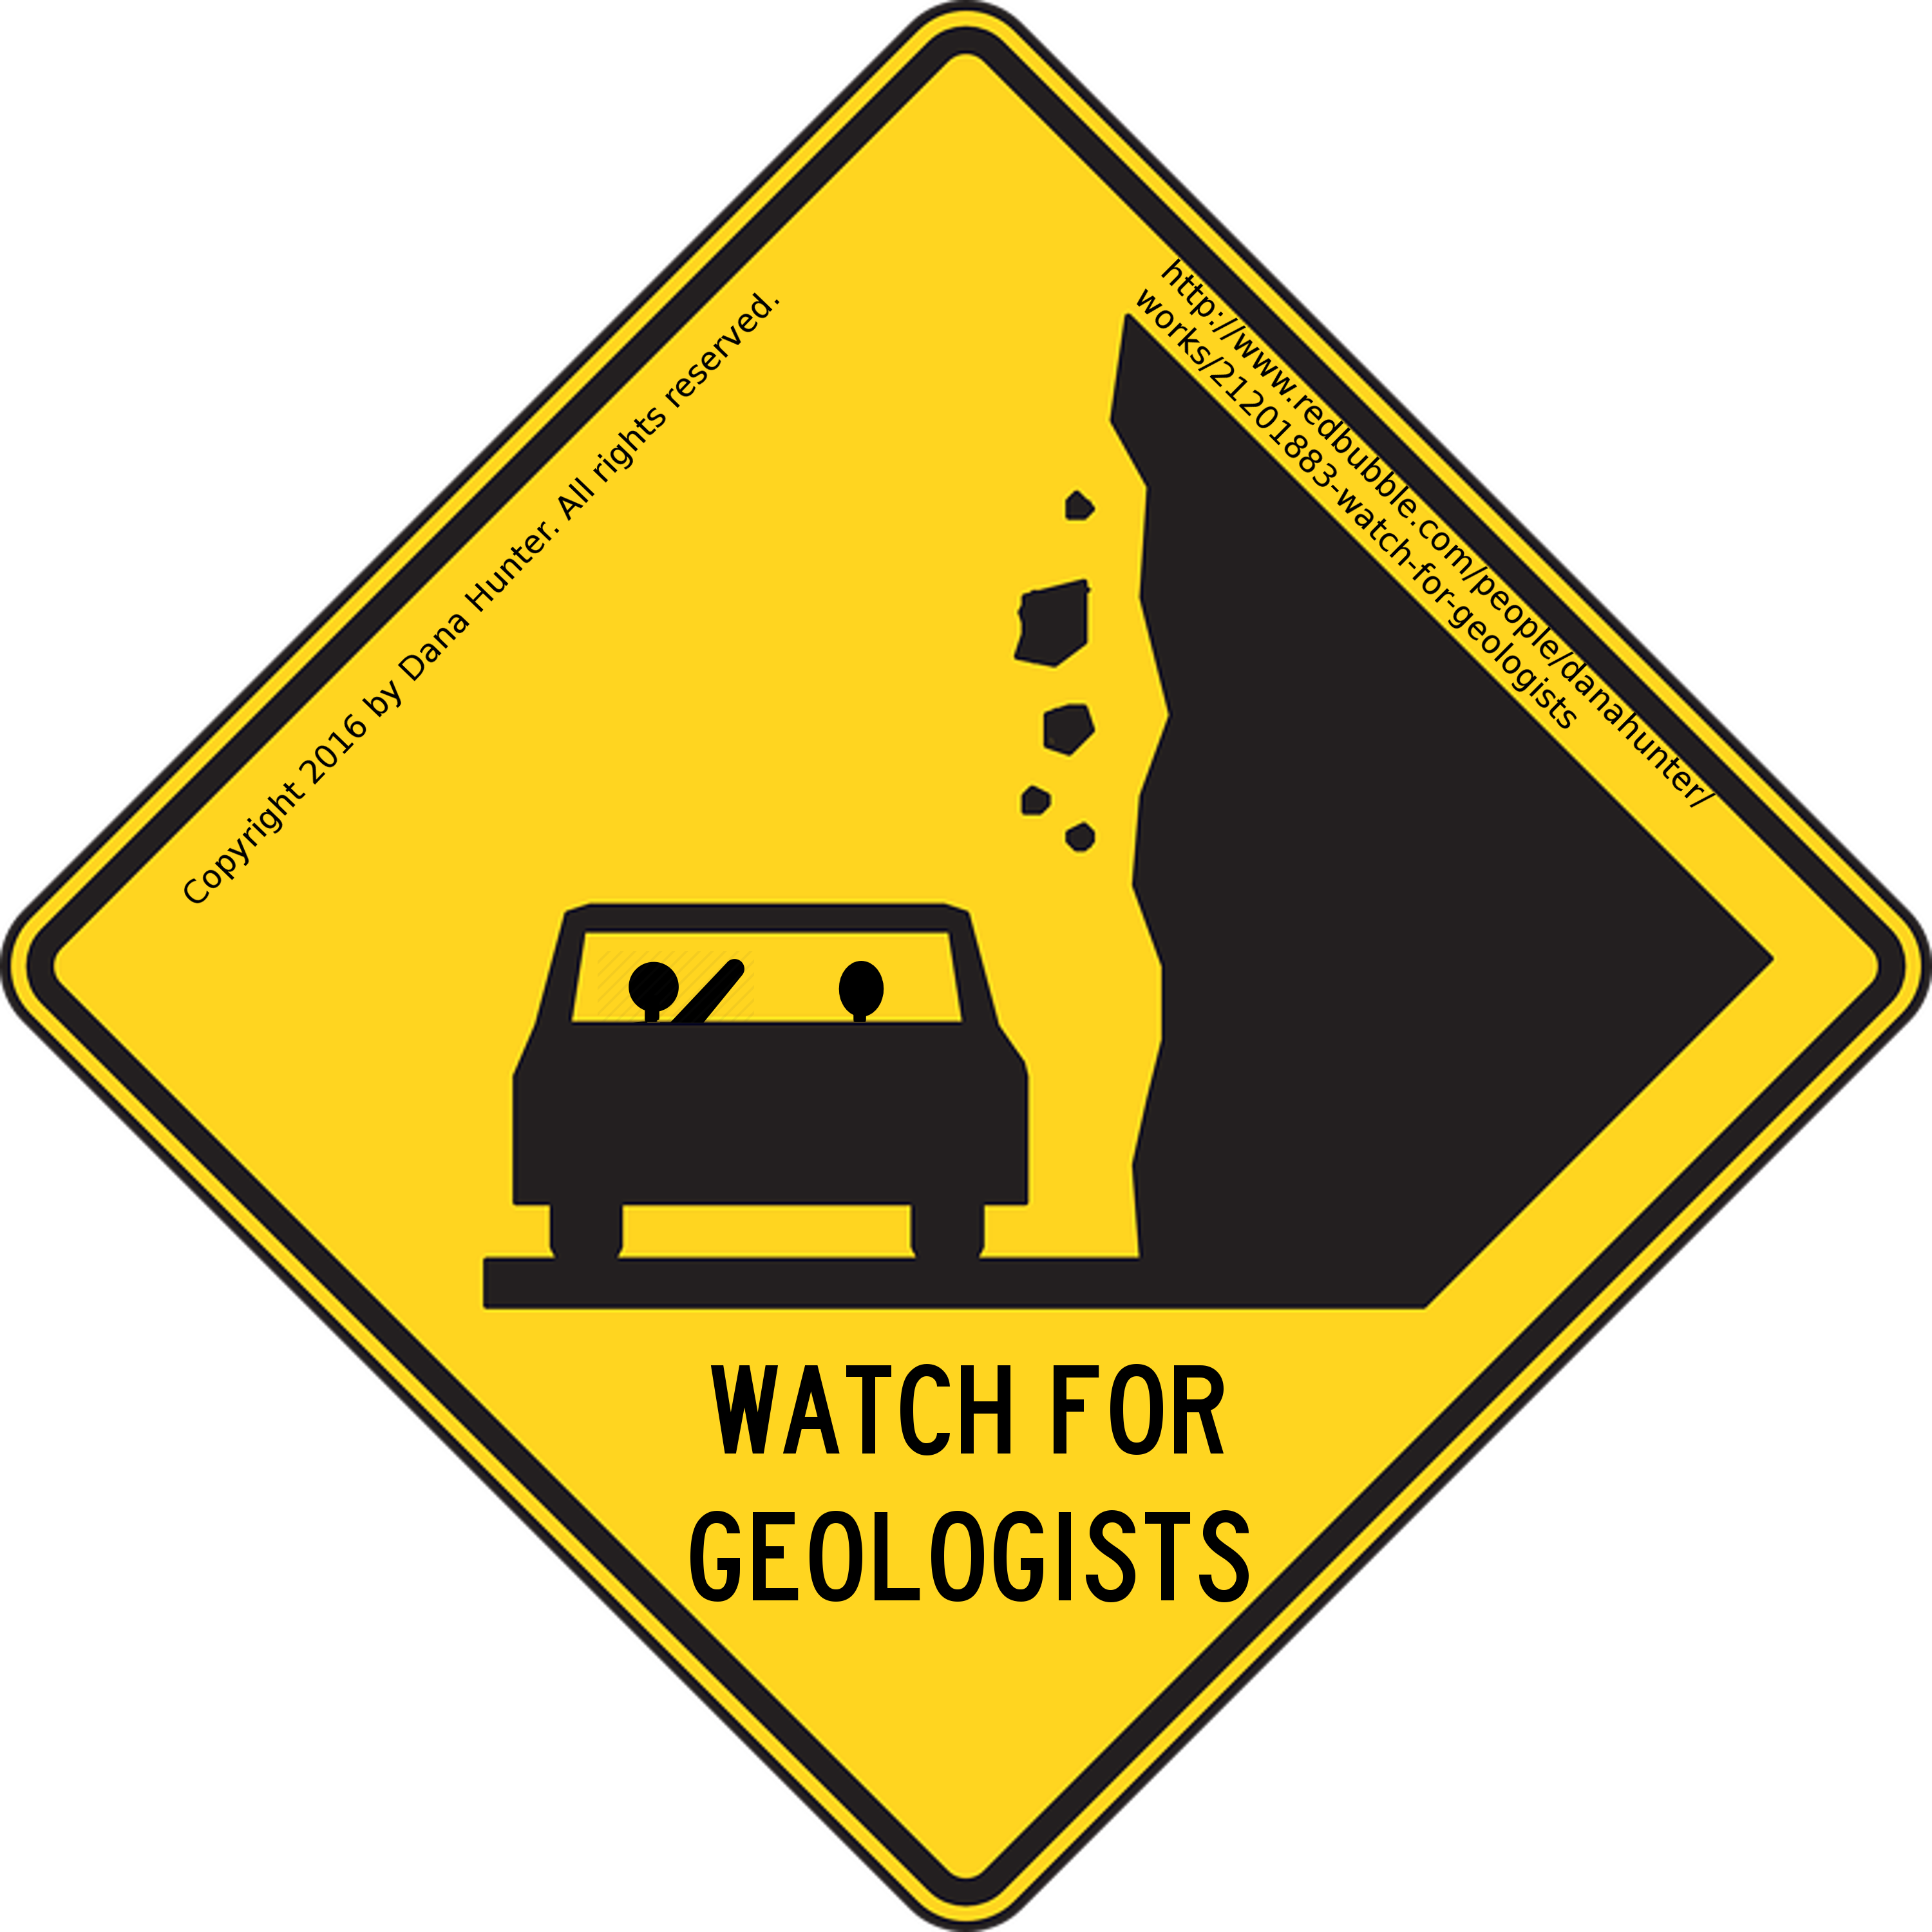 Image is a yellow caution sign with a car beside a cliff with falling rocks. There are two figures in the car. One is pointing at the cliff. Underneath, a caption says "Watch for geologists."